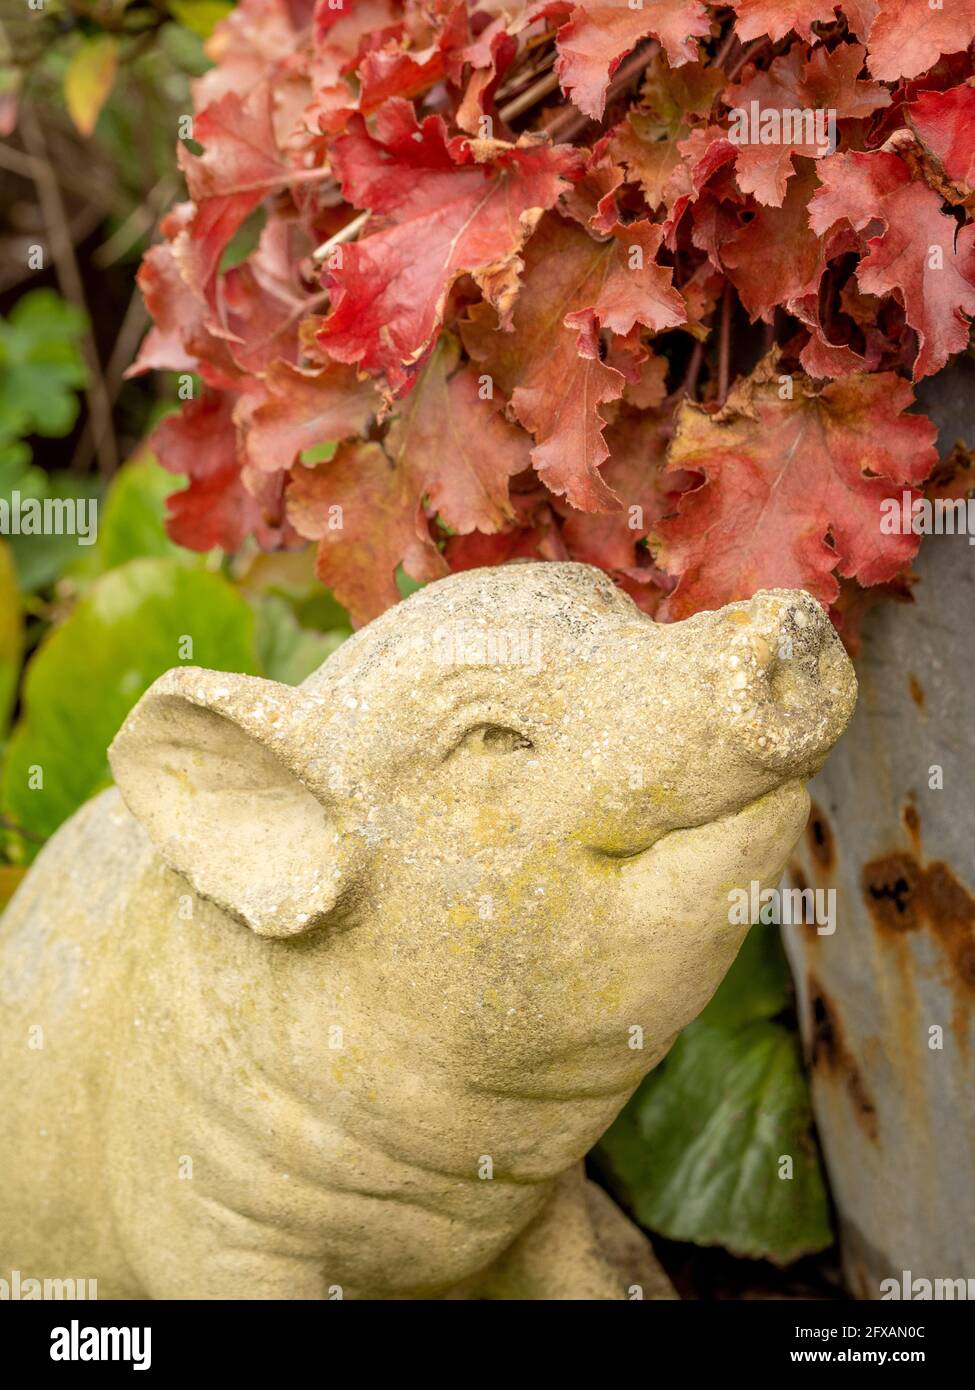 Stone pig garden ornament with a red leaved heuchera plant growing in a rusty galvanised bucket in the background. Stock Photo